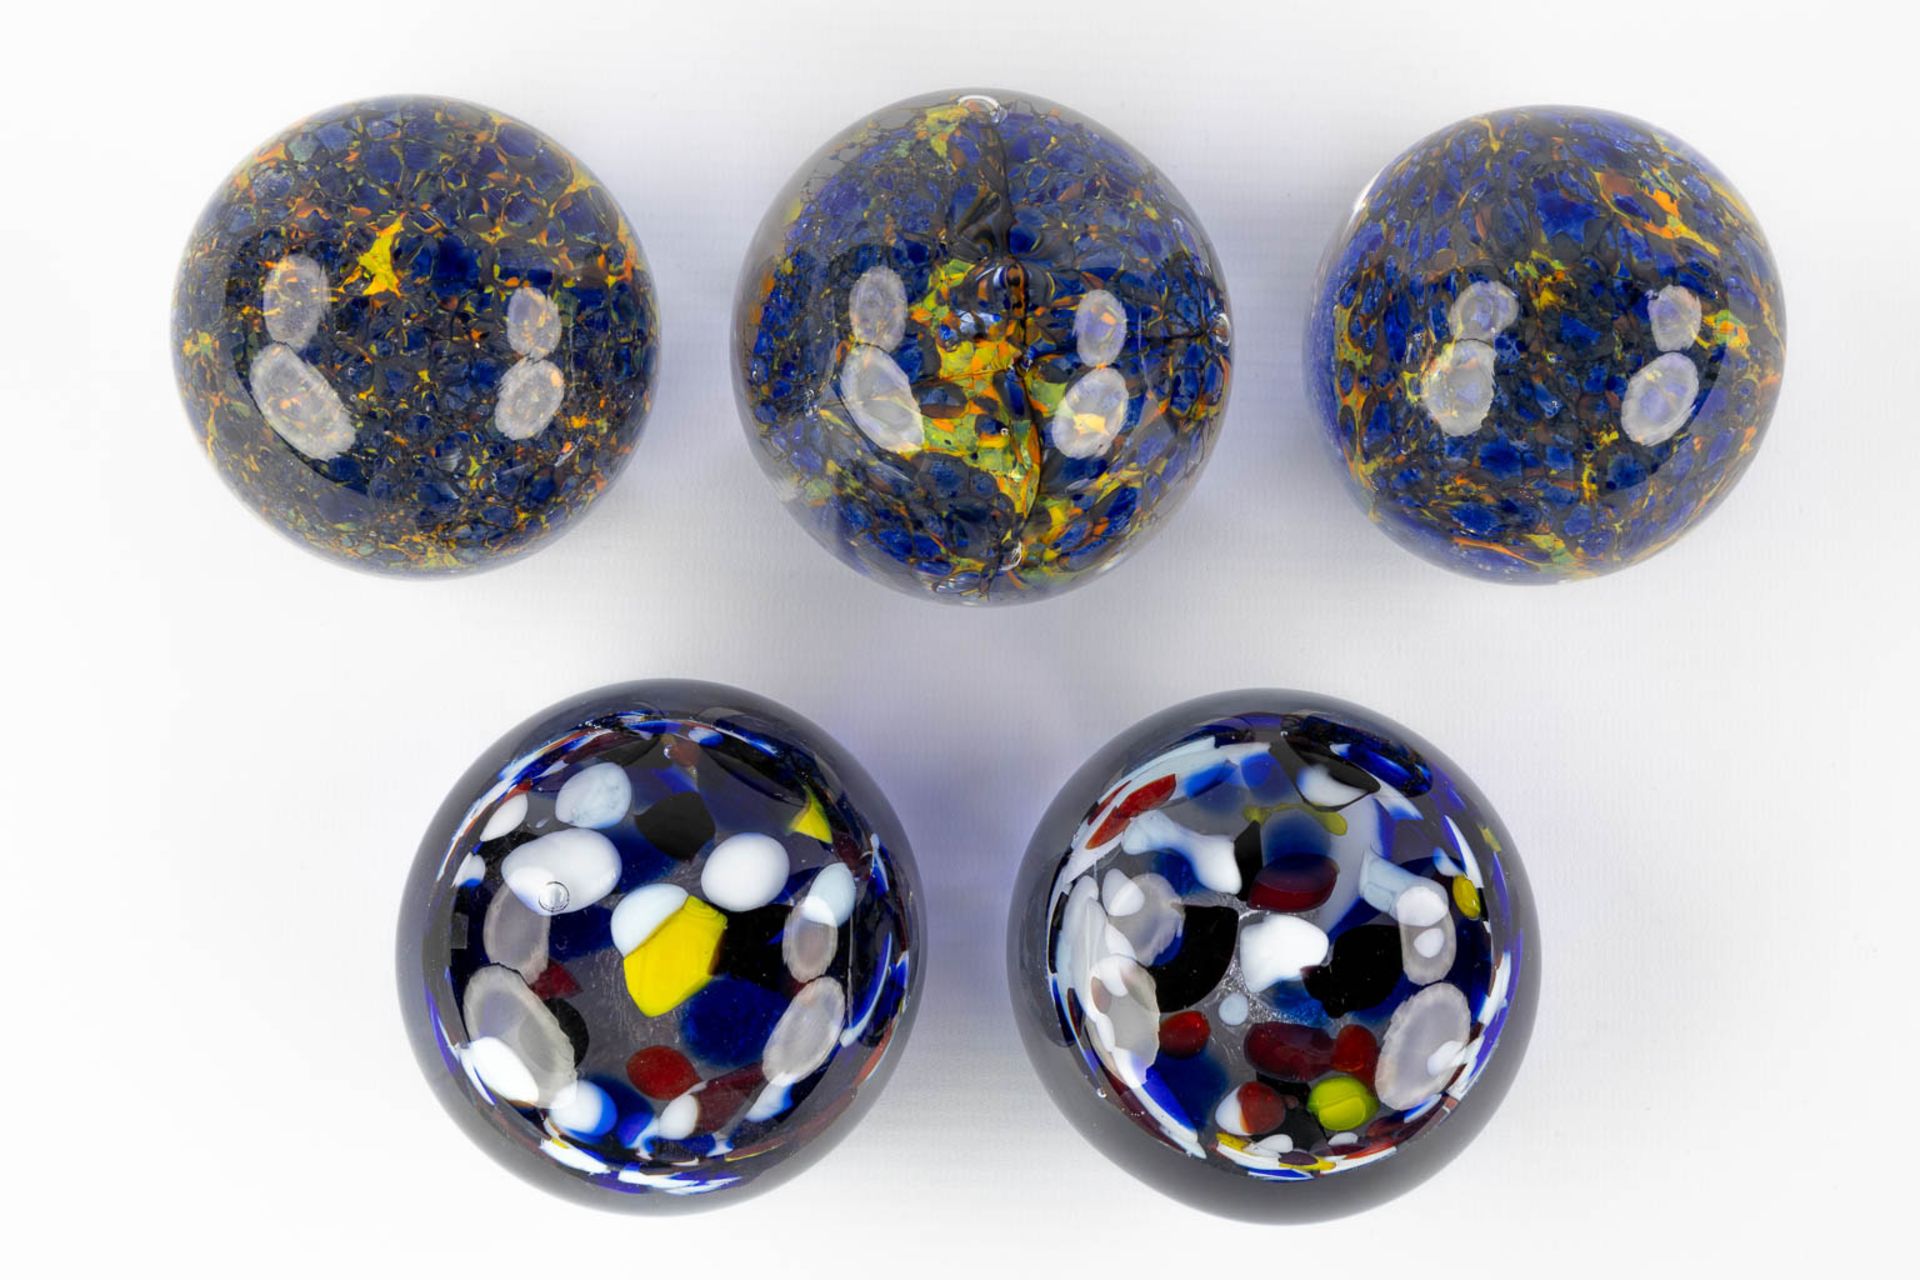 15 paperweights or Presse Papiers, probably made in Murano Italy. (H:8 x D:8 cm) - Bild 13 aus 15